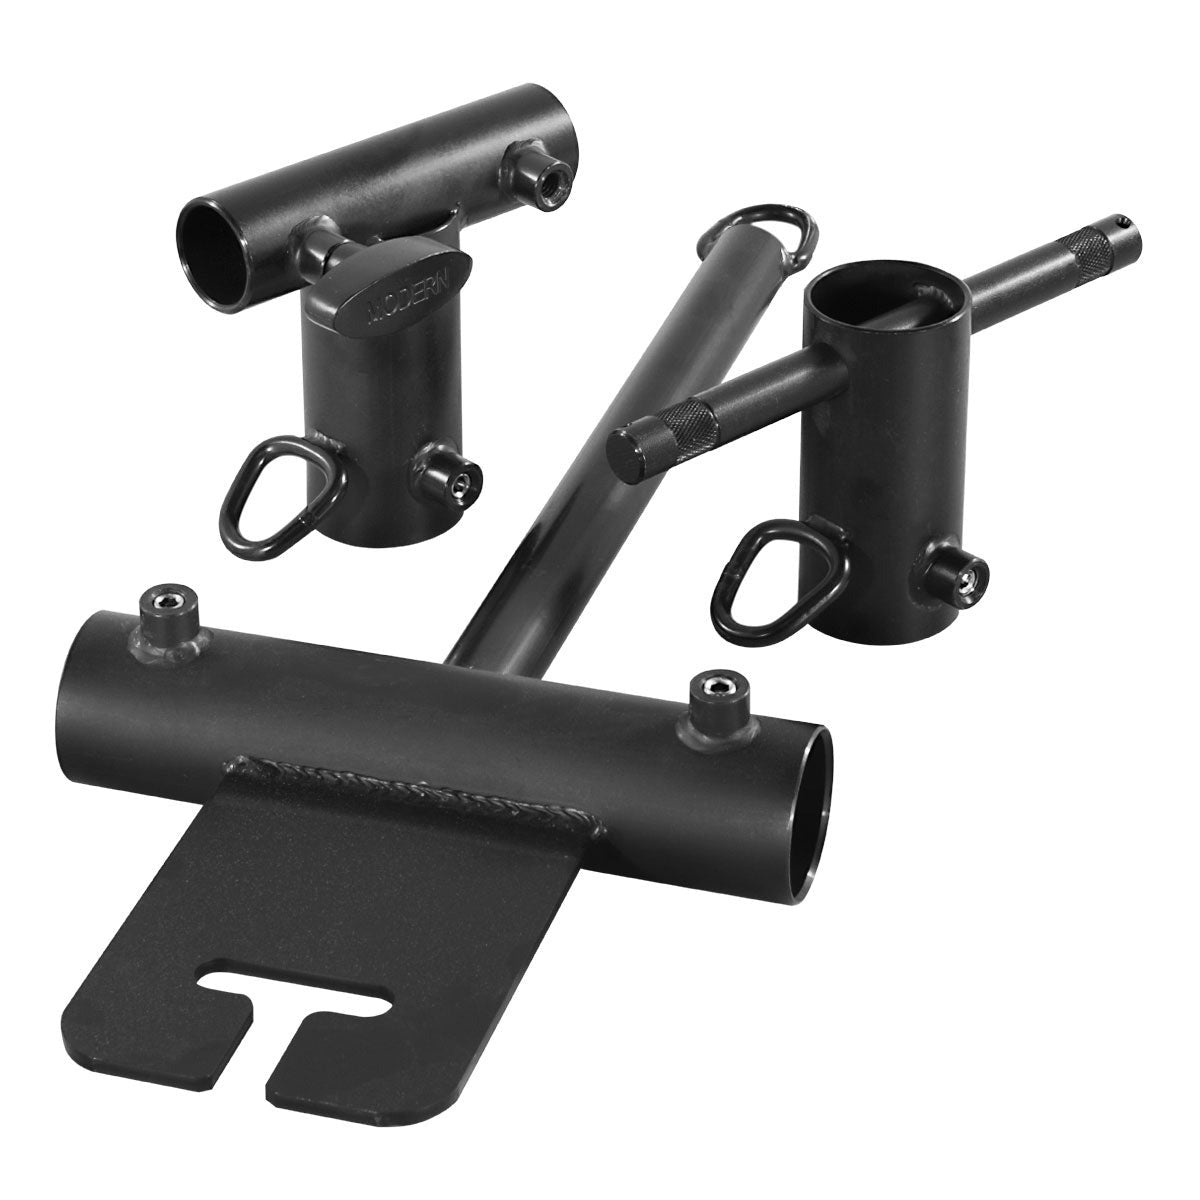 Pipe Boom Kit for 1-1/4" Speed-Rail®